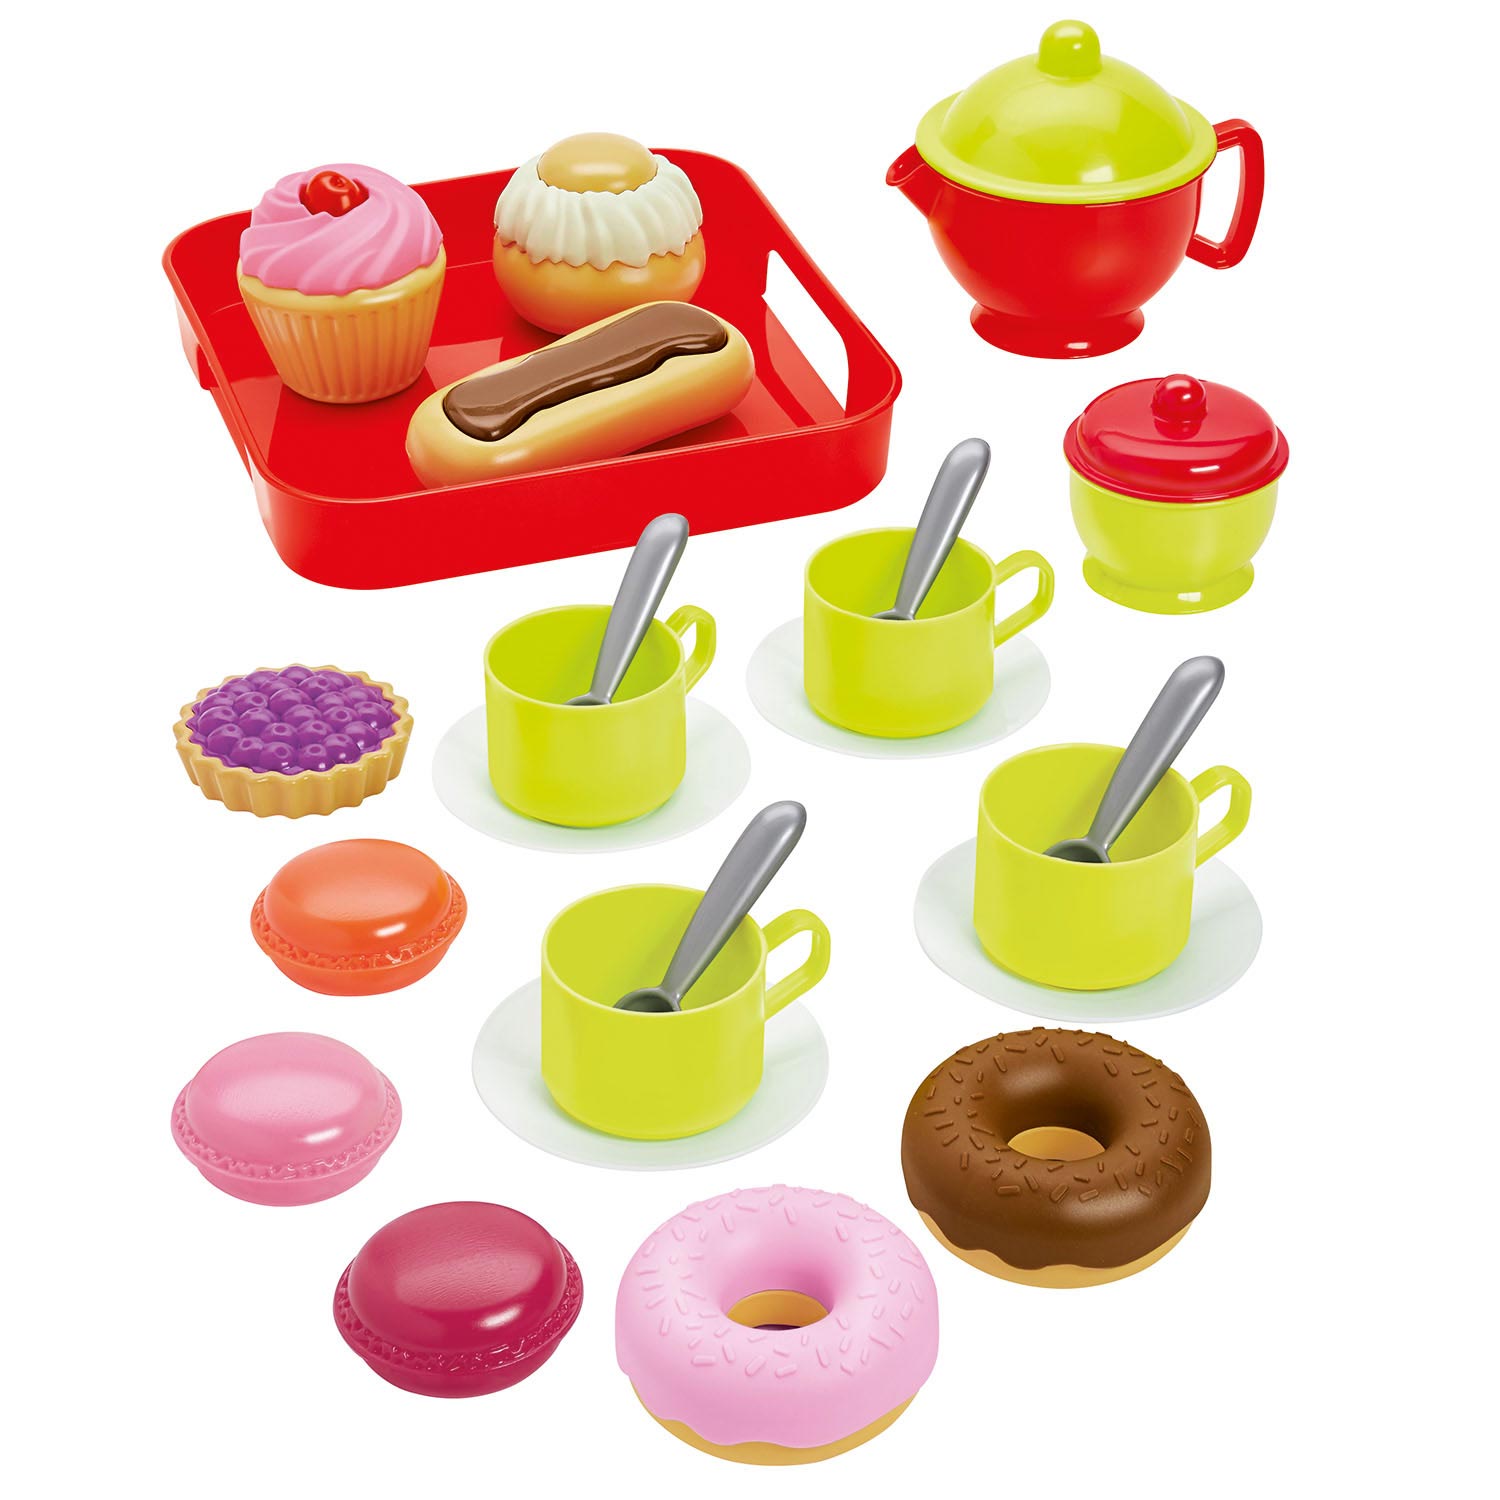 Ecoiffier 100% Chef Crockery with Pastry